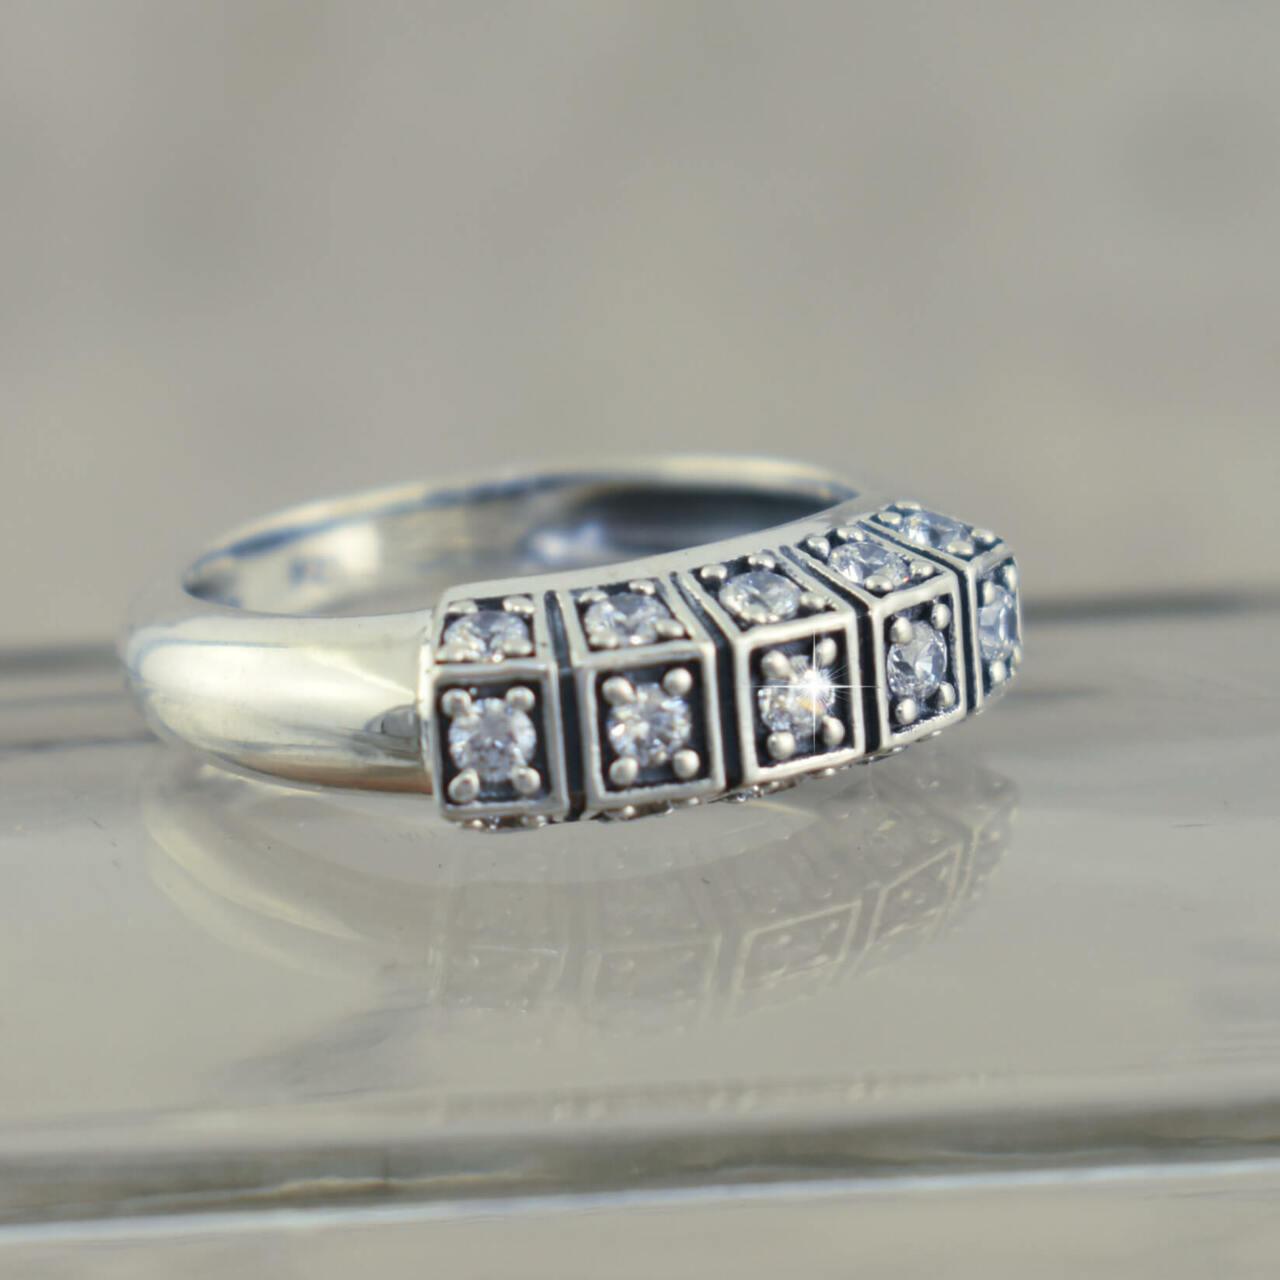 .925 sterling silver antiqued ring with cubic zirconia